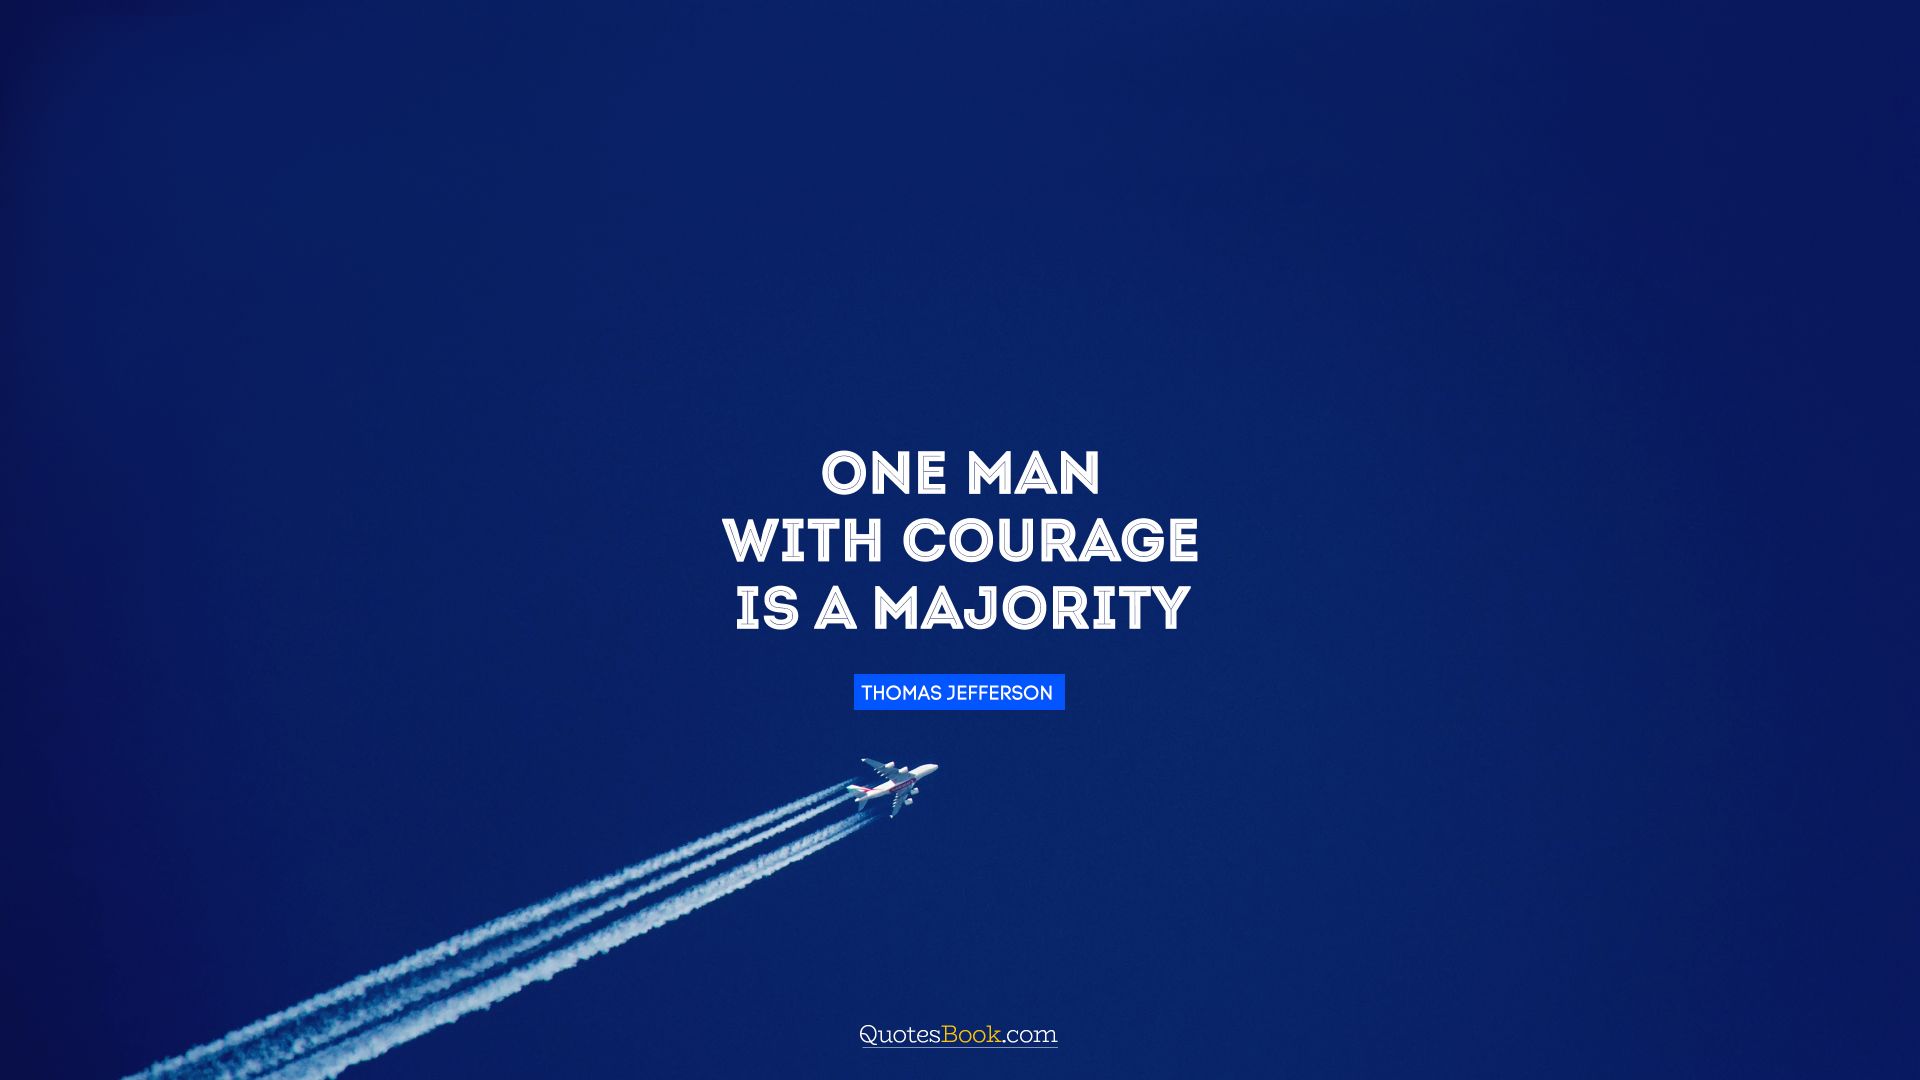 One man with courage is a majority. - Quote by Thomas Jefferson 